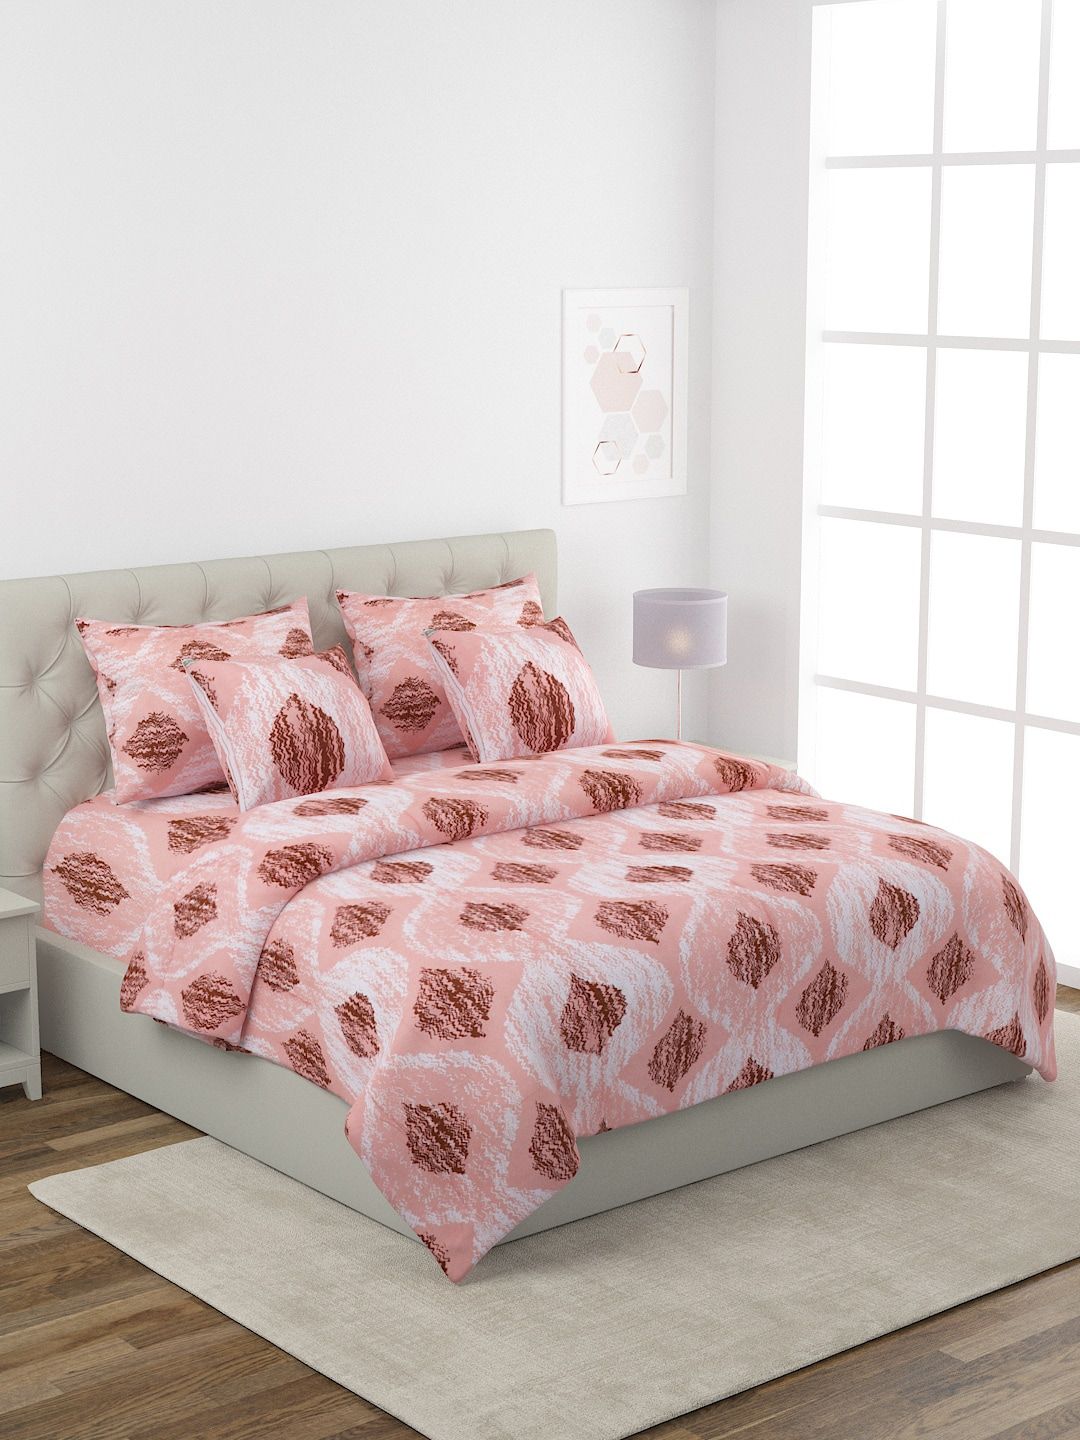 ROMEE Pink & White Quirky Printed Double King Bedding Set with AC Comforter Price in India